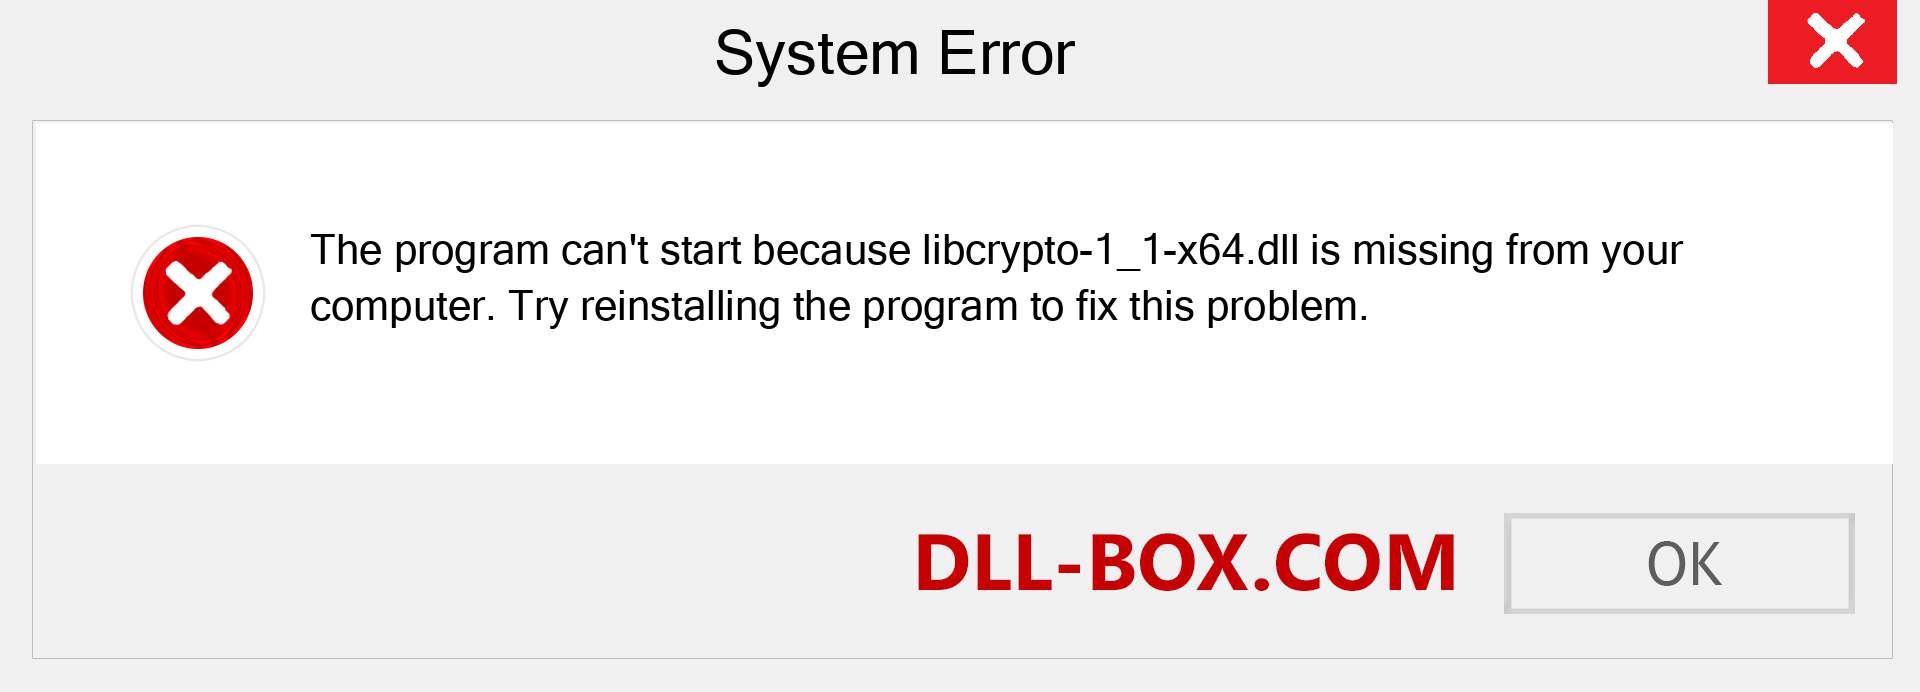  libcrypto-1_1-x64.dll file is missing?. Download for Windows 7, 8, 10 - Fix  libcrypto-1_1-x64 dll Missing Error on Windows, photos, images